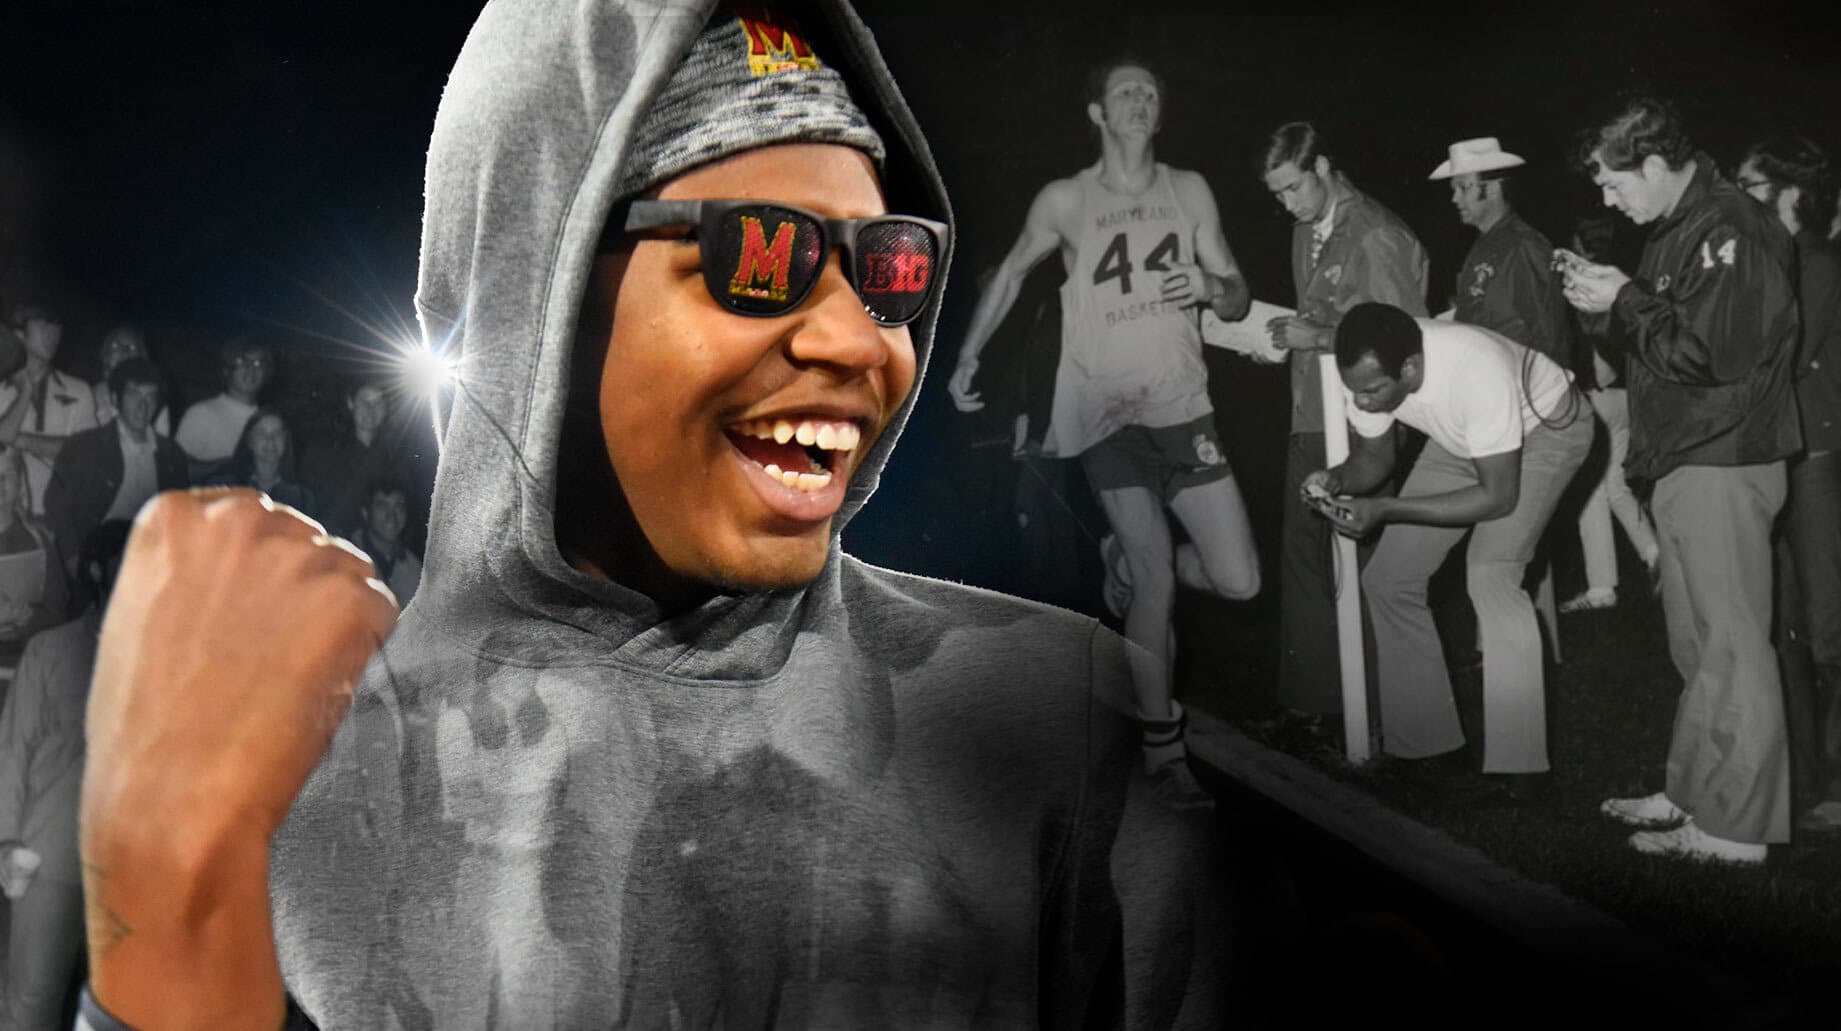 Collage of archival Midnight Mile photos and a current Terp wearing UMD gear